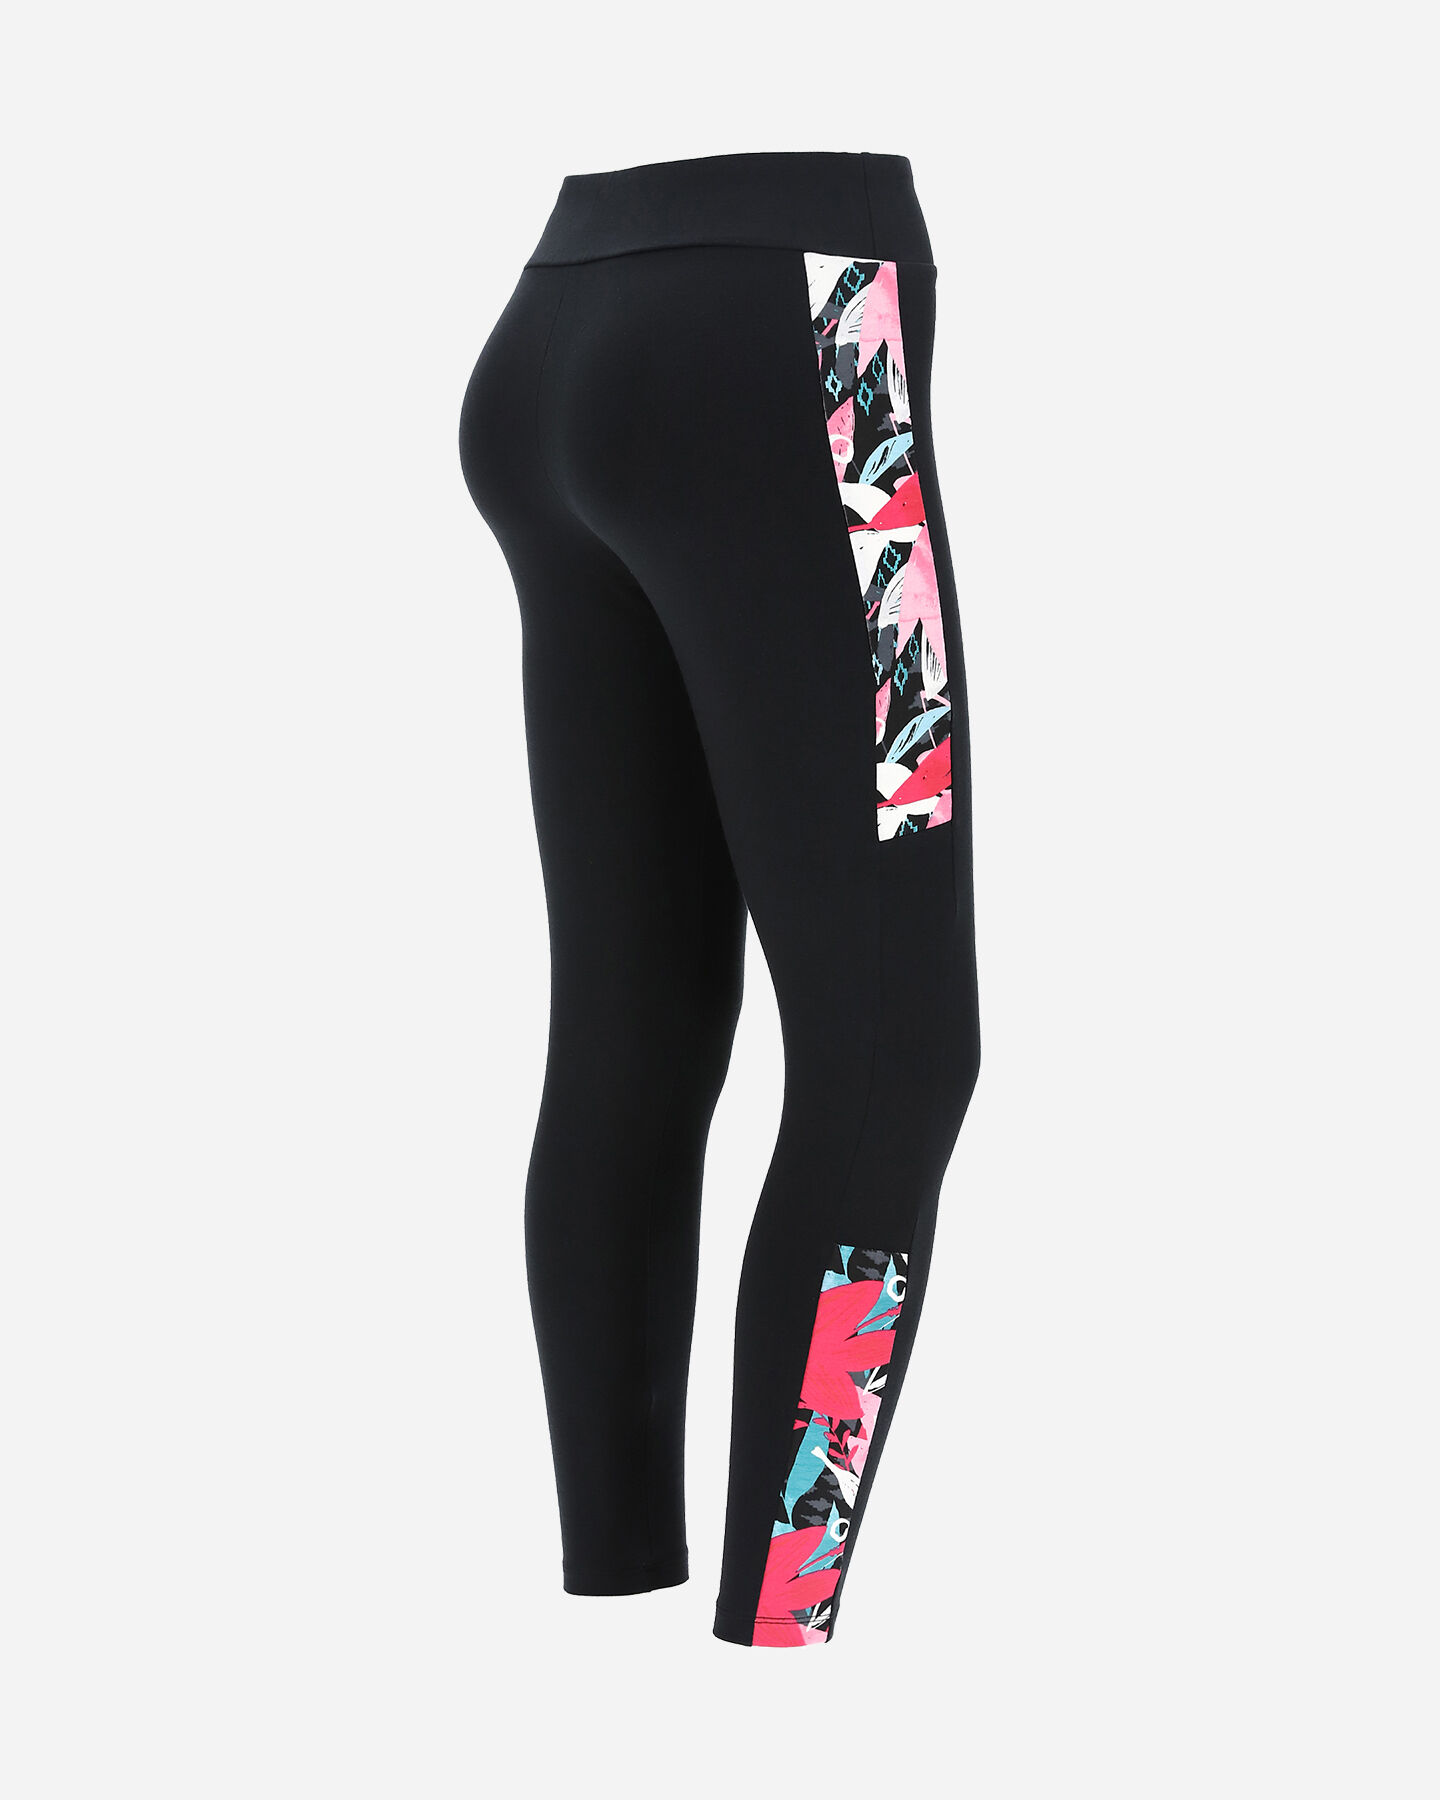  Leggings FREDDY JSTRETCH BAND FLOWERS LATERAL W S5432087|NFLO20-|XS scatto 1